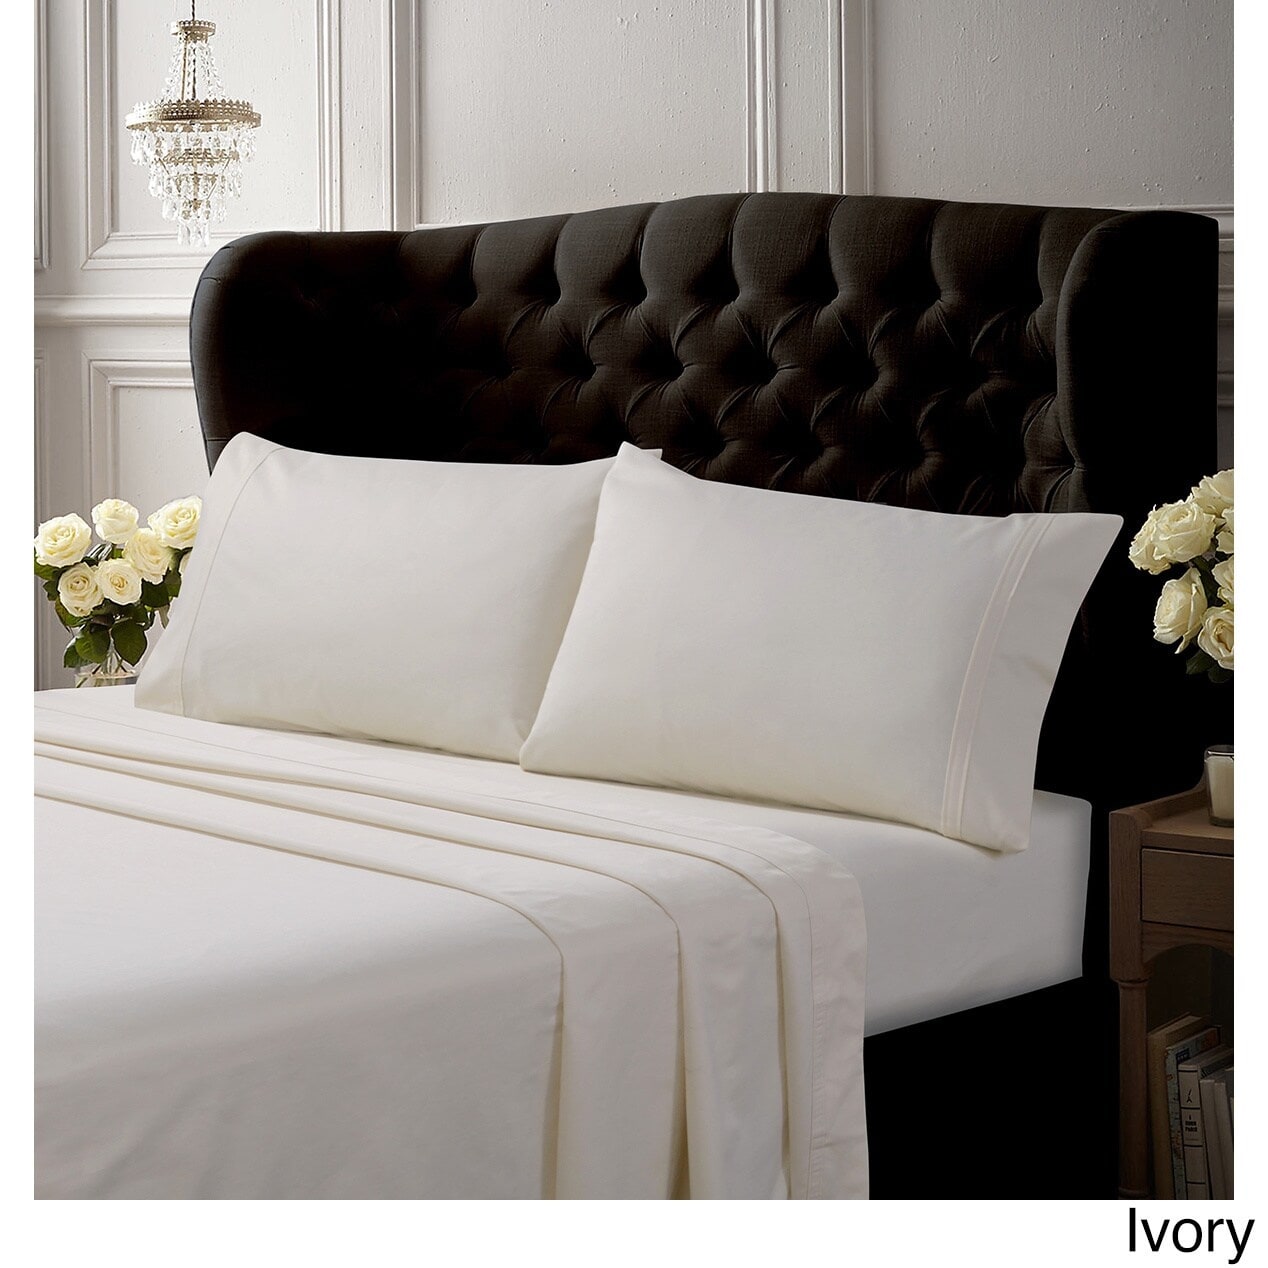 Egyptian Cotton Gorgeous Ivory Bedding Items 1000 TC Solid Select Item & AU Size 